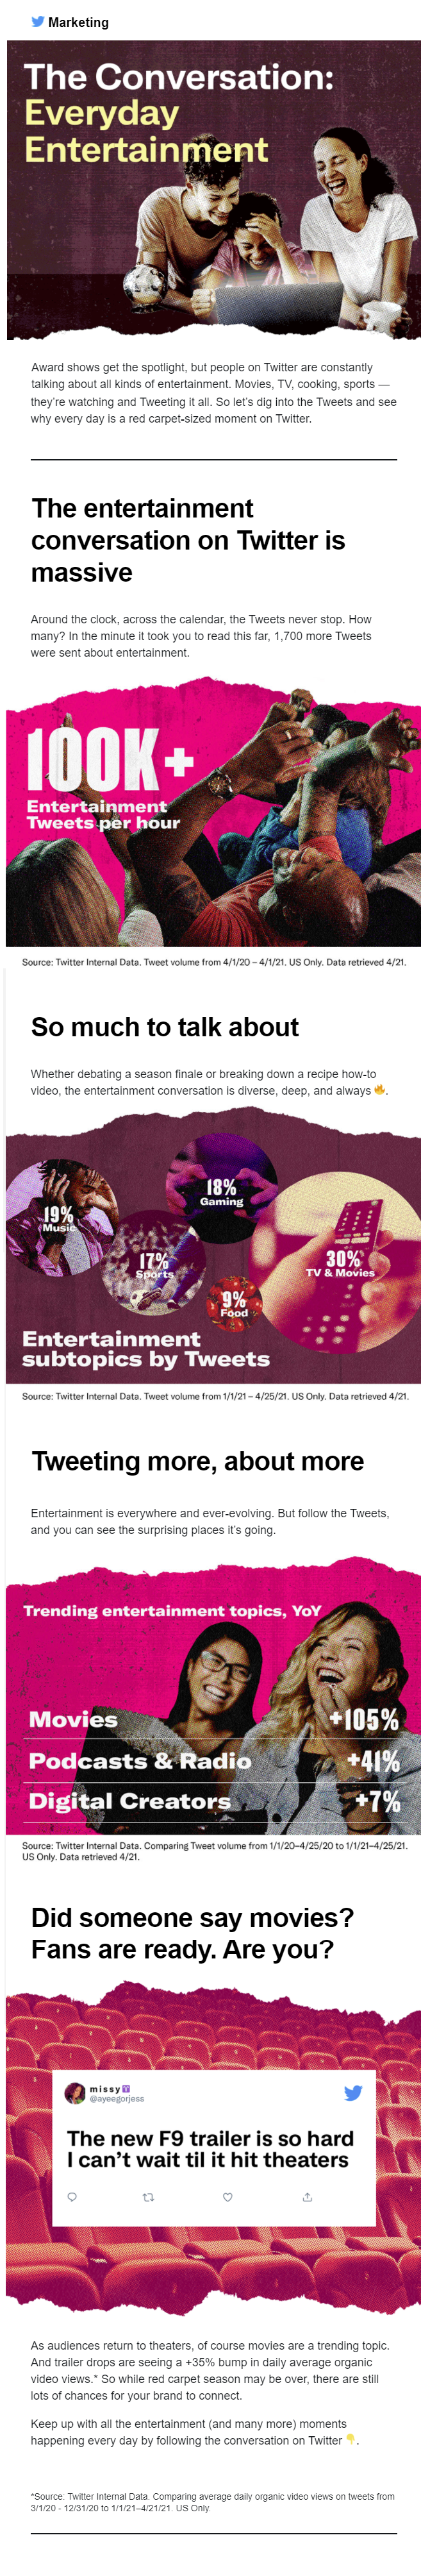 twitter shares new insights into evolving entertainment discussion via tweets infographic